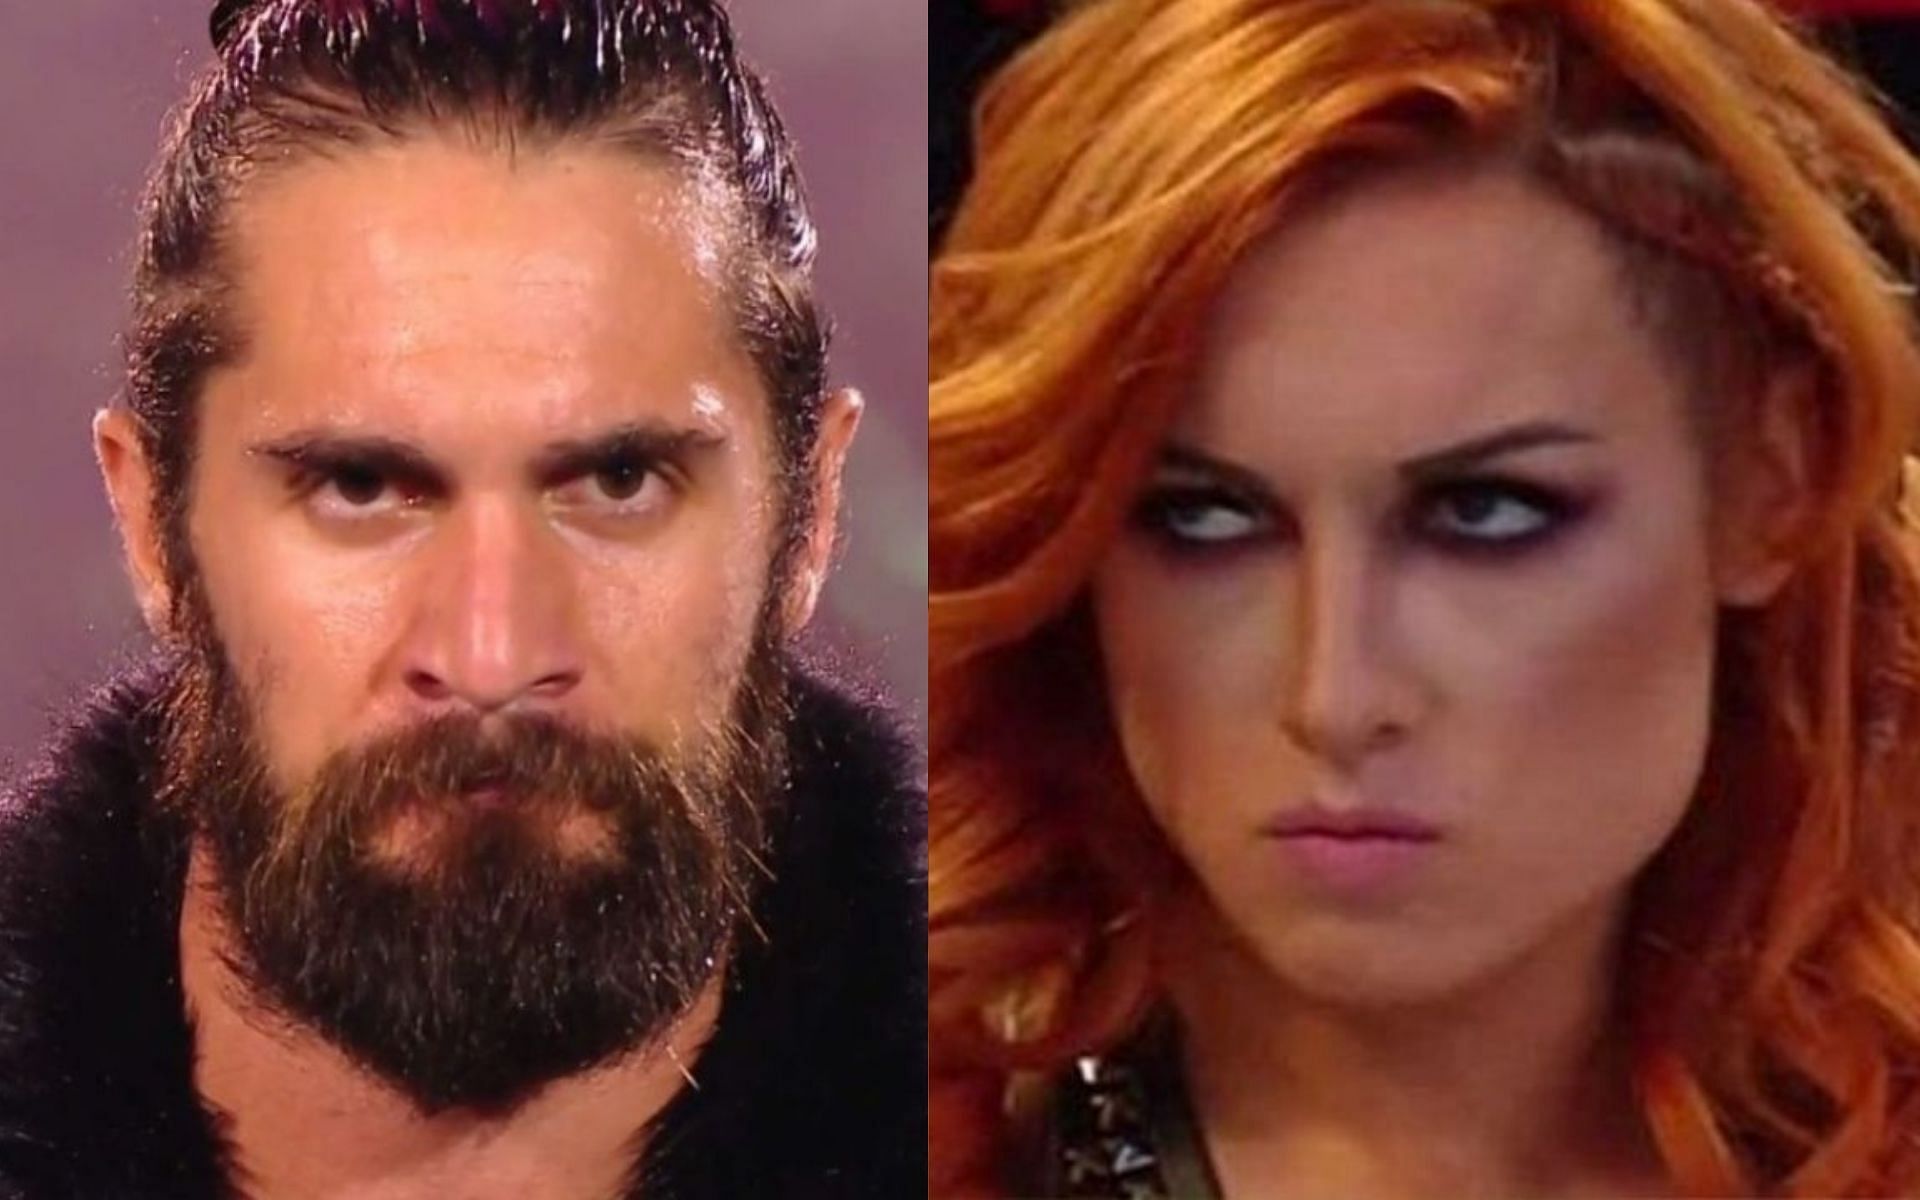 Seth Rollins and Becky Lynch are married in real life and have a daughter together